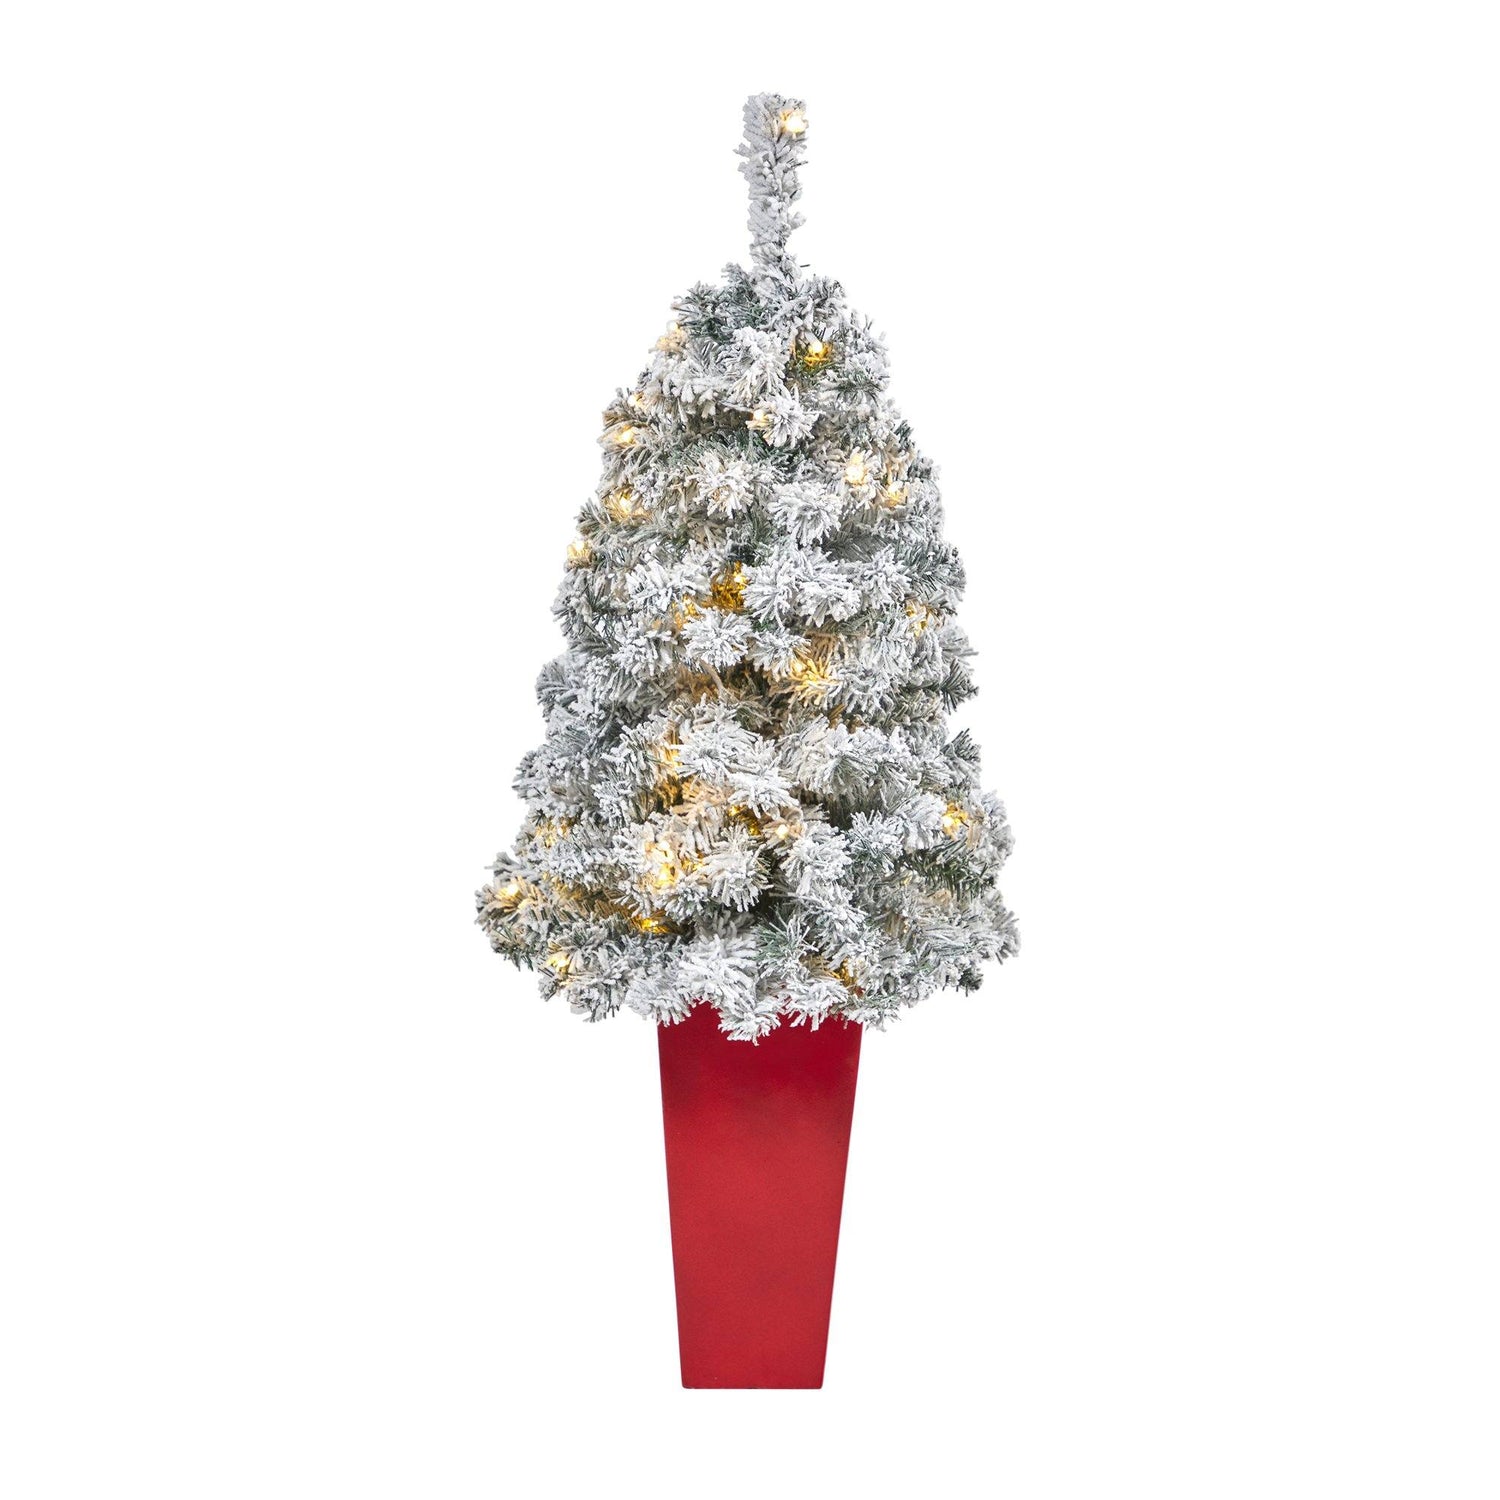 44” Flocked Rock Springs Spruce Artificial Christmas Tree with 50 Clear LED Lights in Red Tower Planter